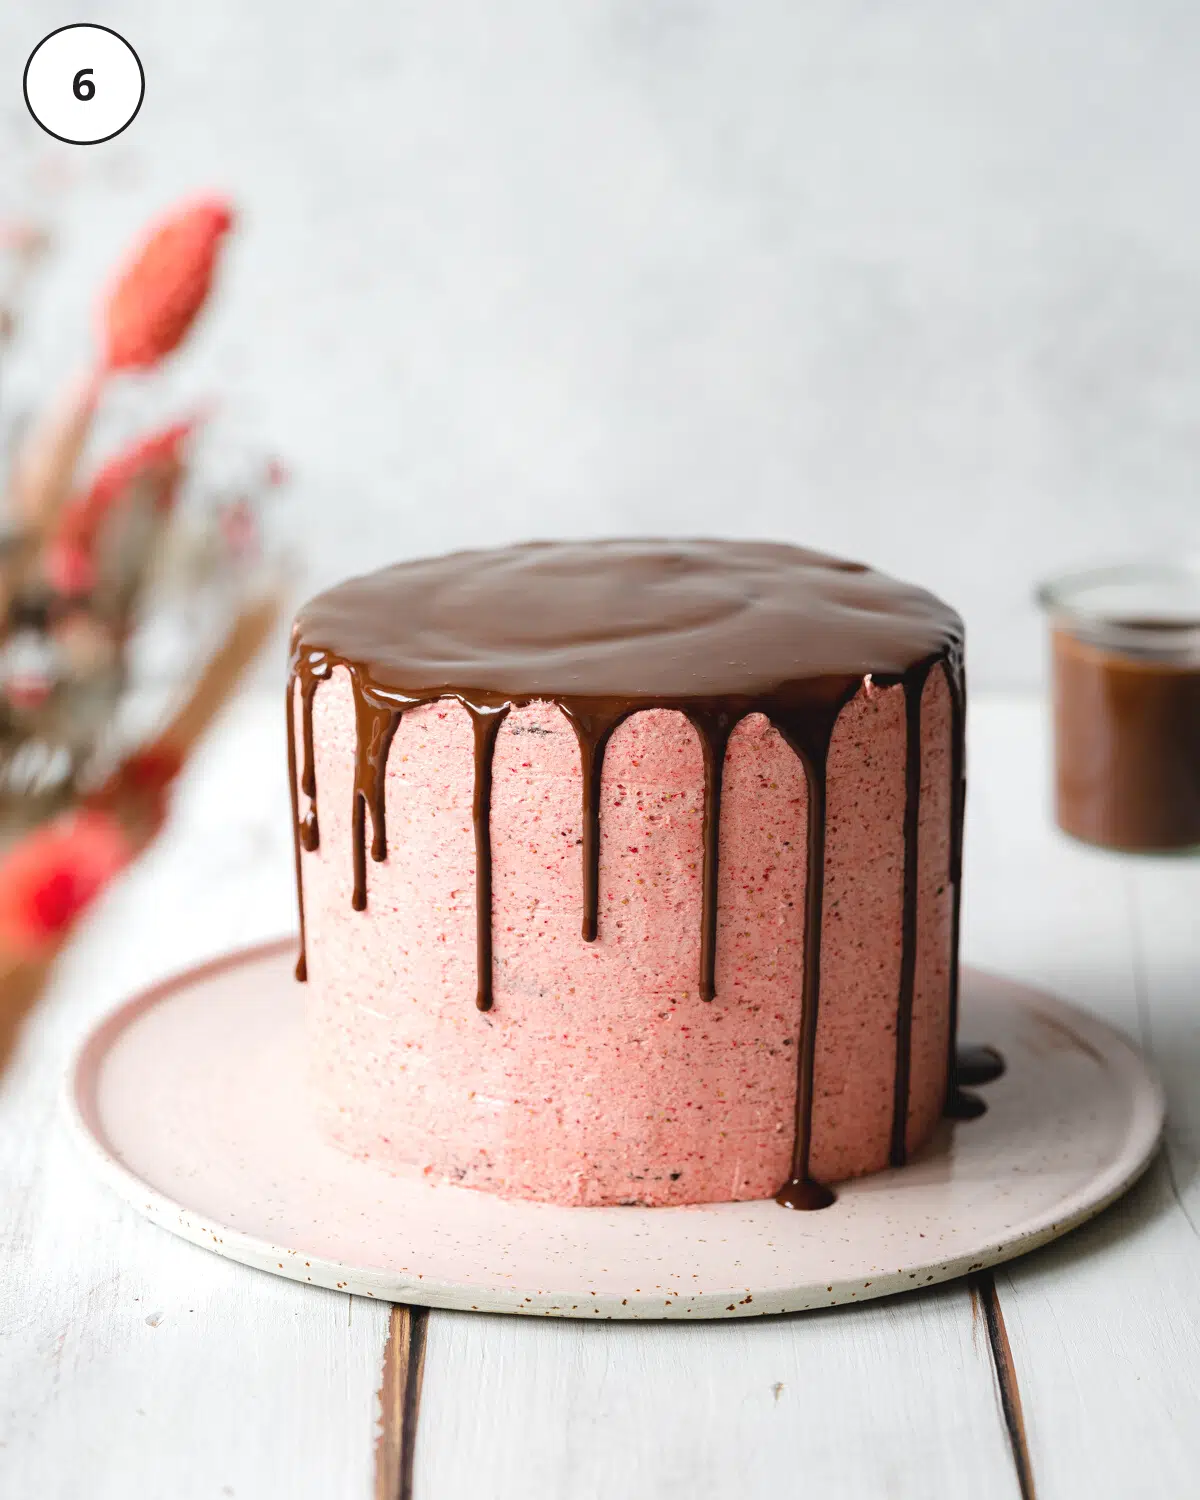 pink cake with chocolate ganache drip on a ceramic plate.